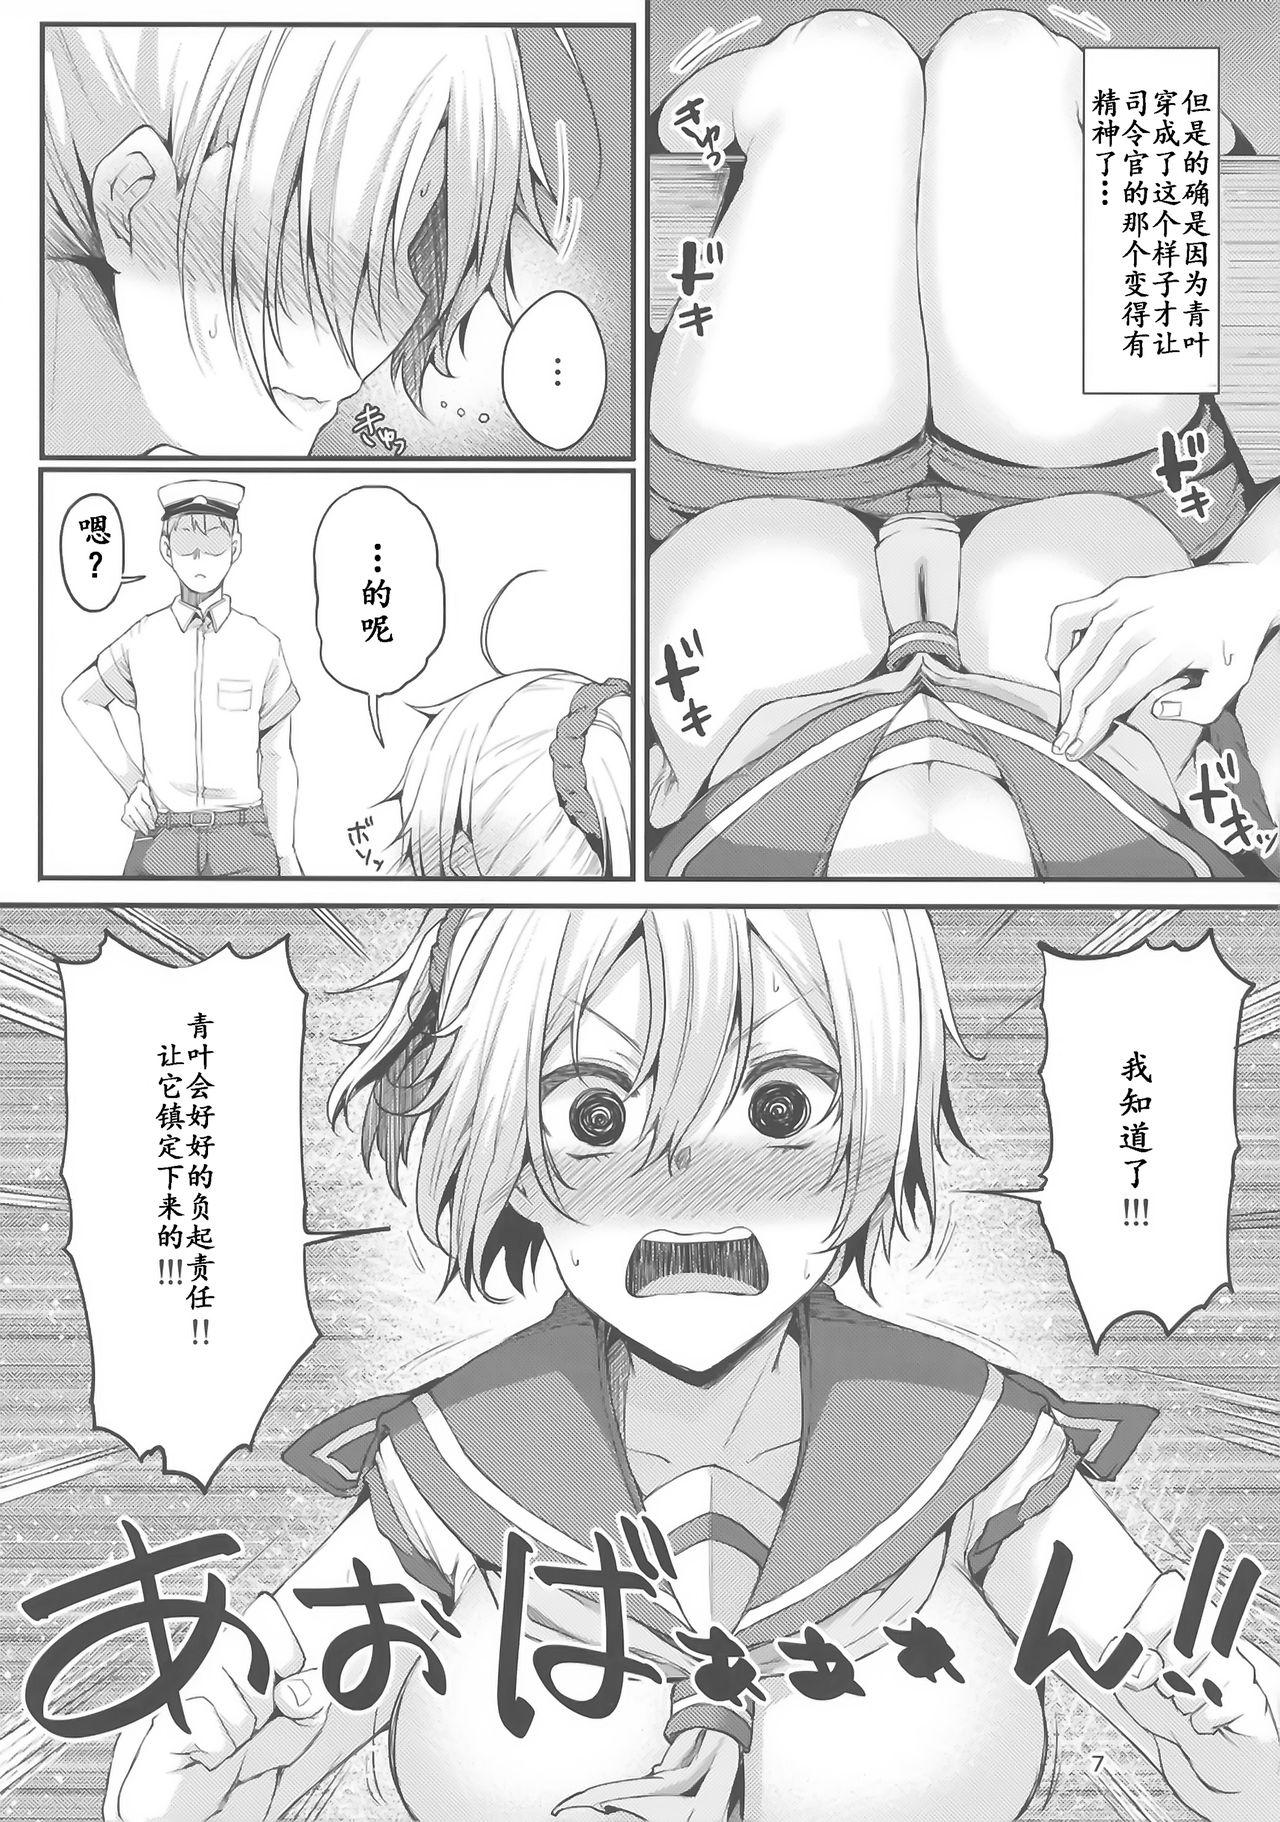 Petite Motto x2 Aobax! - Kantai collection Russian - Page 8